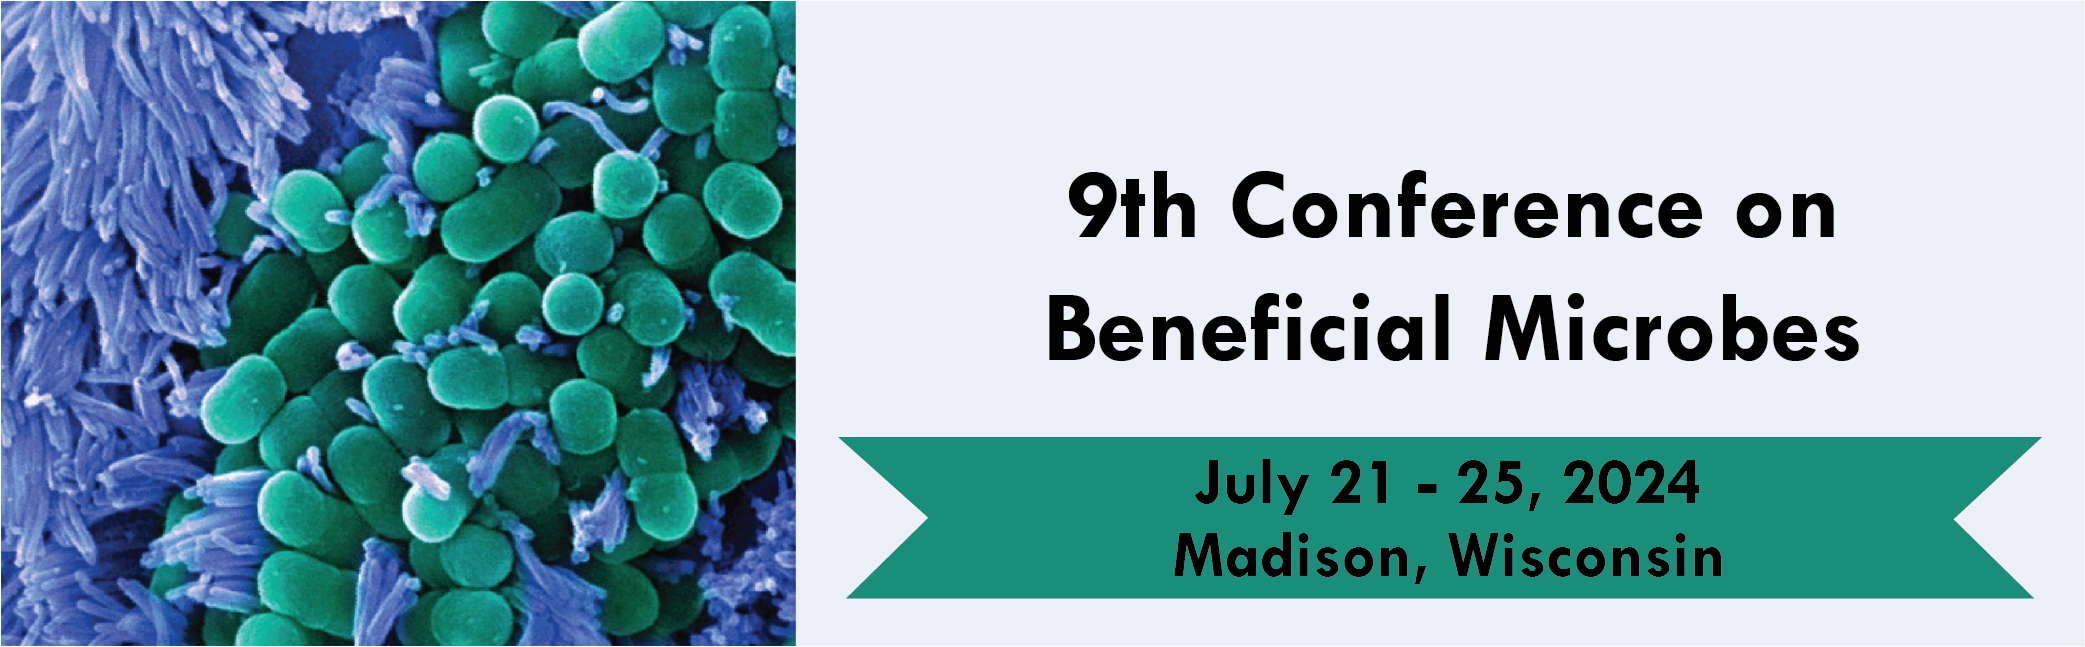 Conference on Beneficial Microbes